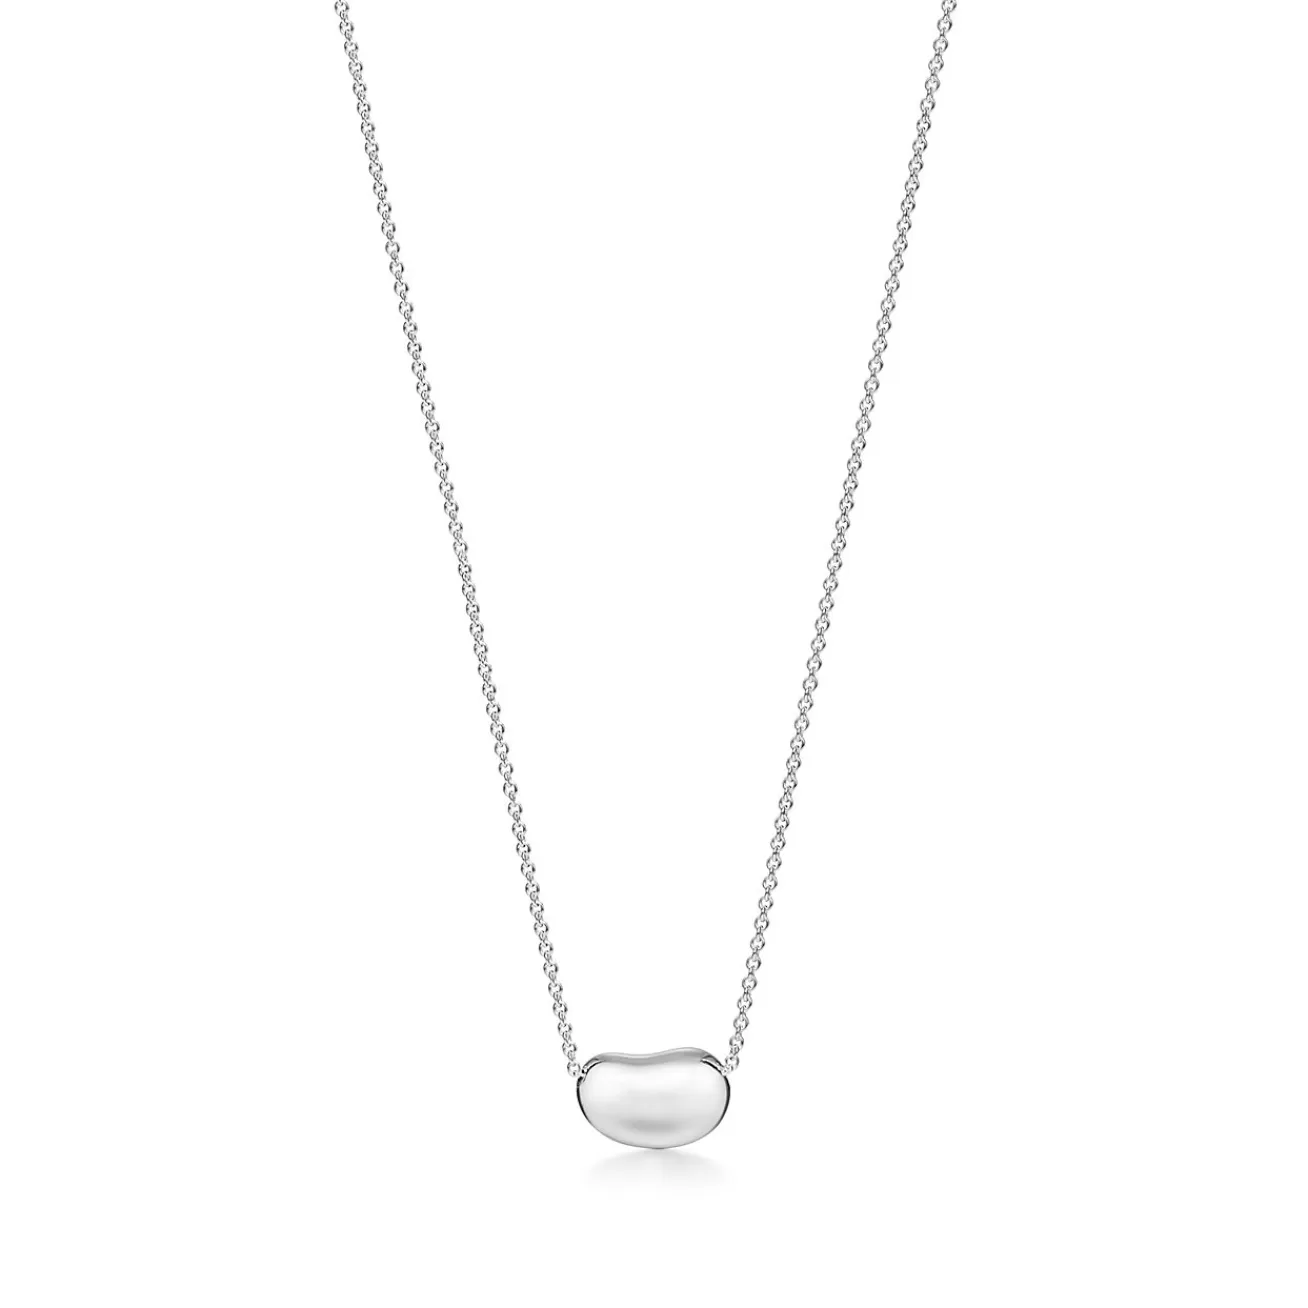 Tiffany & Co. Elsa Peretti® Bean® design Pendant in Sterling Silver, 12 mm | ^ Necklaces & Pendants | Gifts for Her